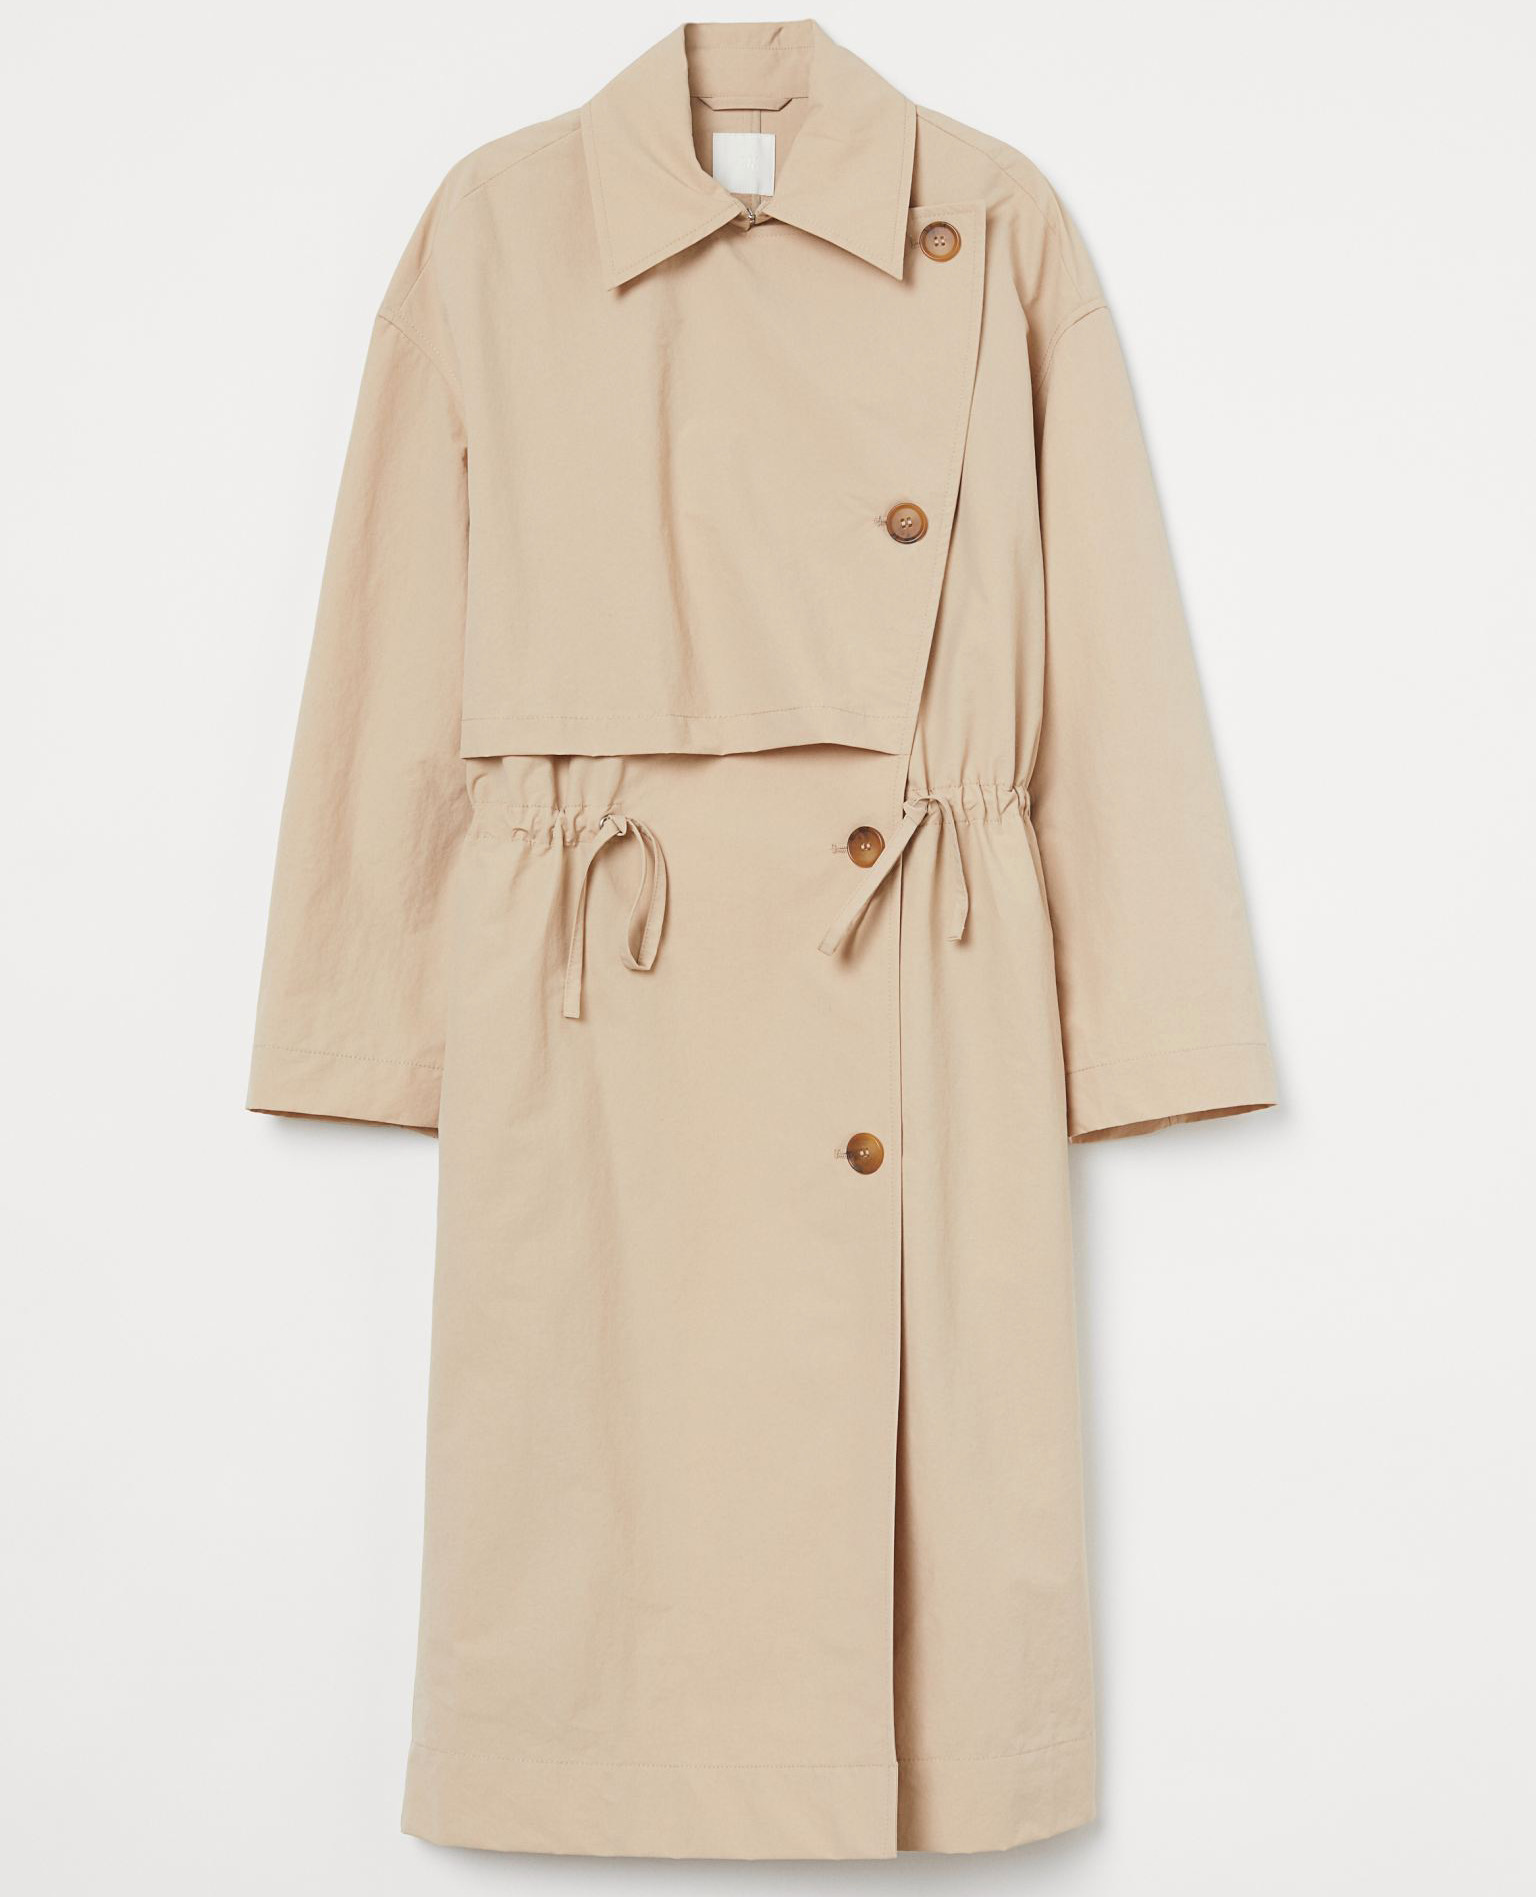 Habitually Chic® » 17 Chic Trench Coats for April Showers